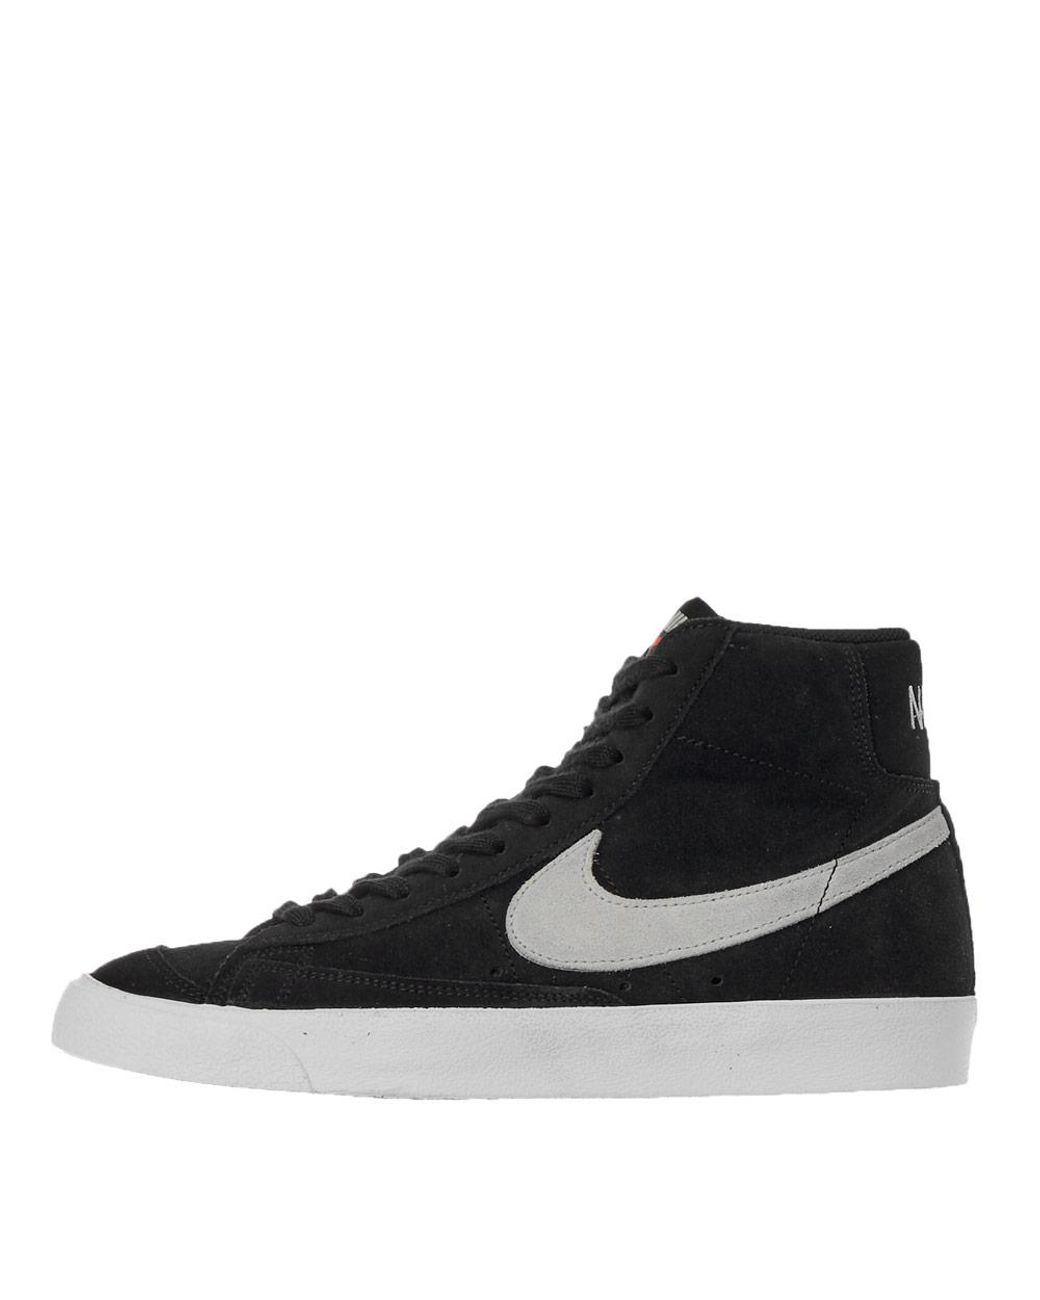 Nike Suede Blazer Mid 77 Trainers in Black for Men - Lyst